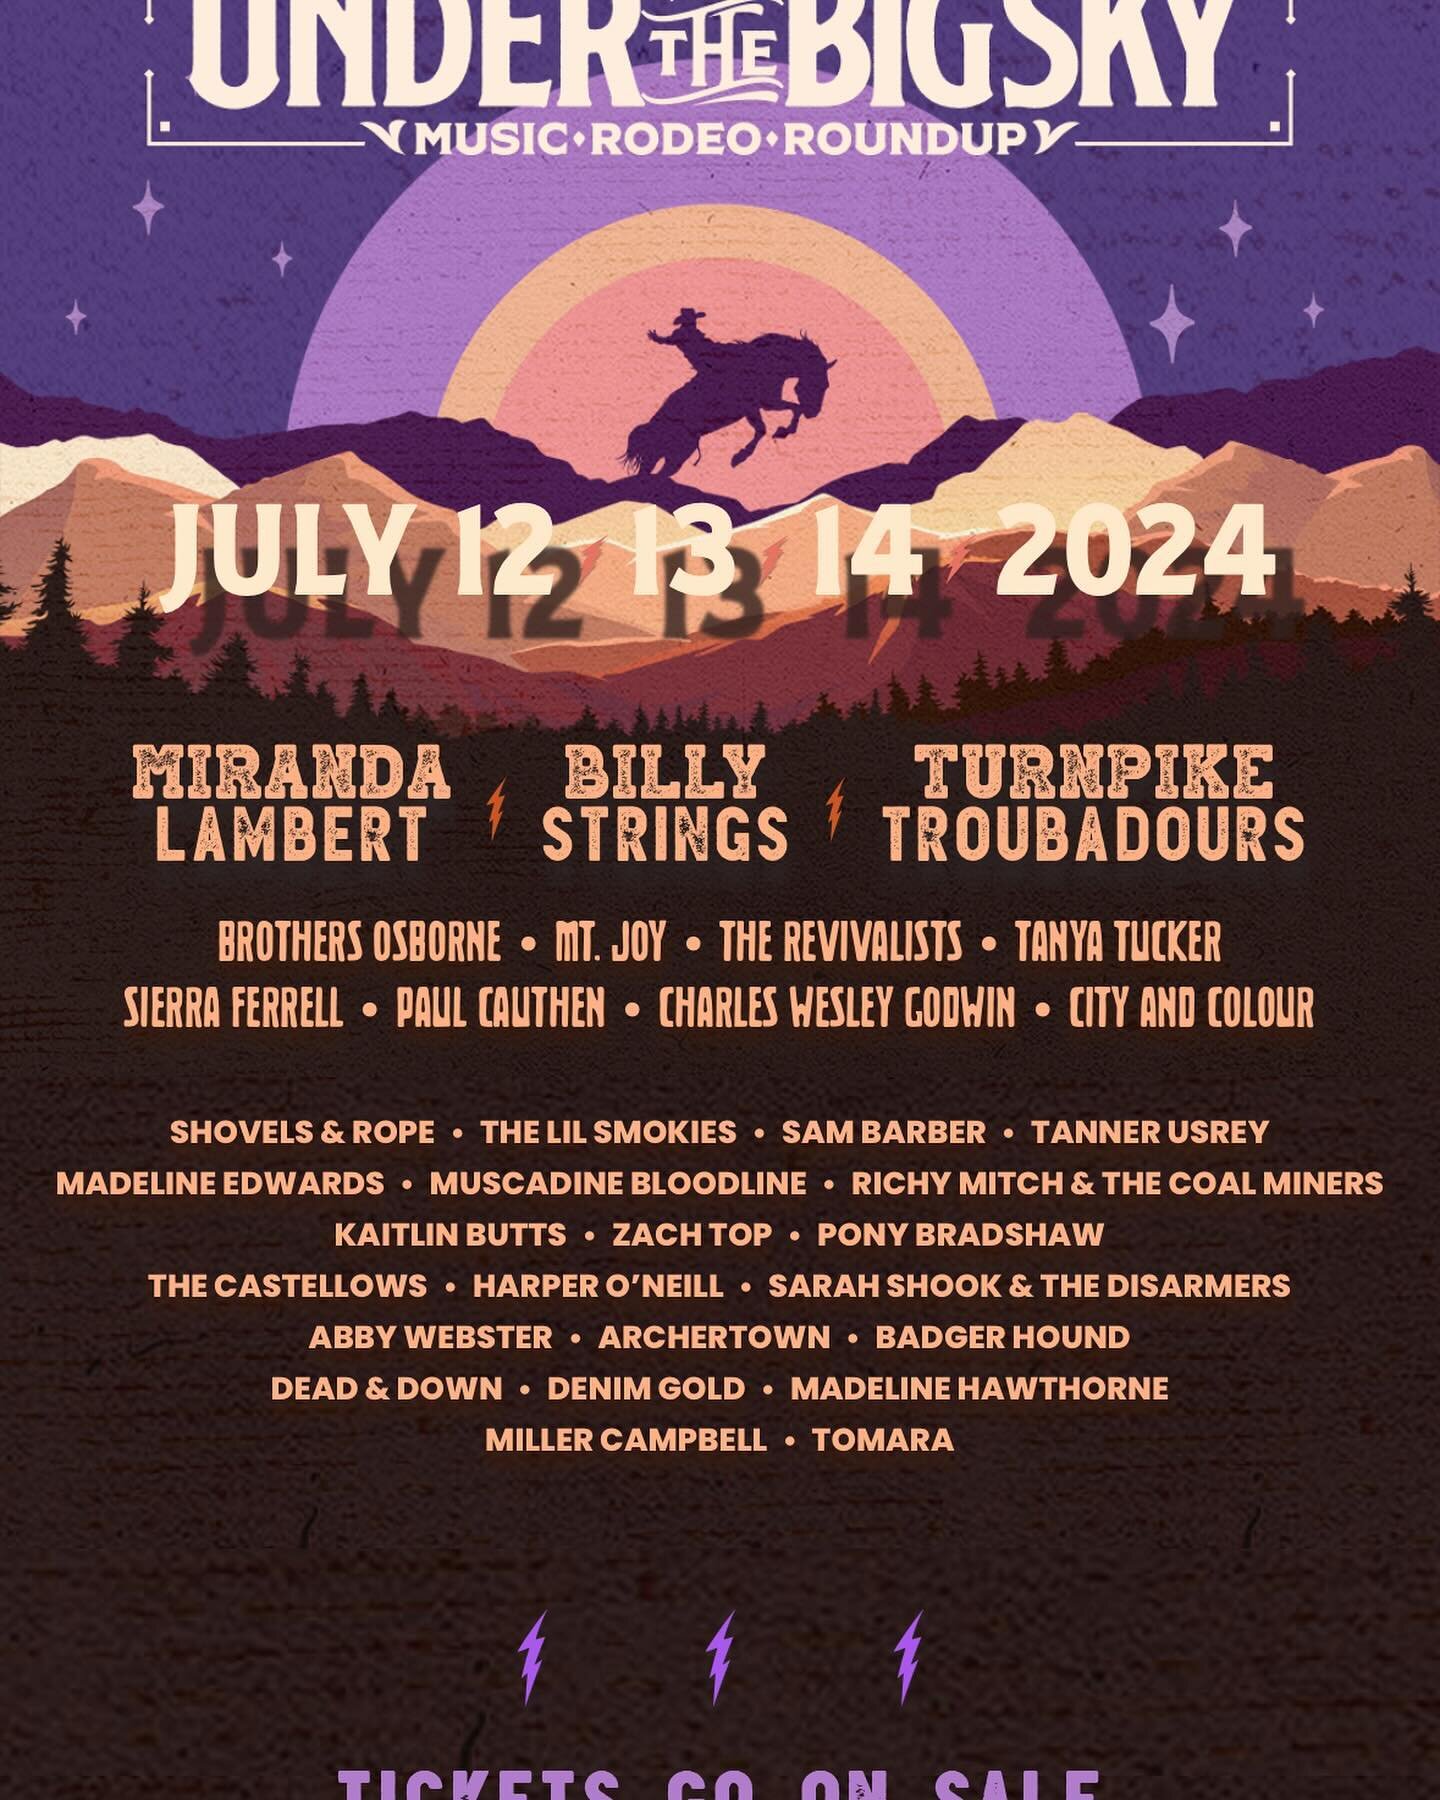 Dates and lineup released for #underthebigskyfest 2024. It&rsquo;s going to be another great.  Get your lodging secured soon. It fills up quick.  Back Forty Lodge is less than a mile from the gate and coming home to property after an epic day at the 